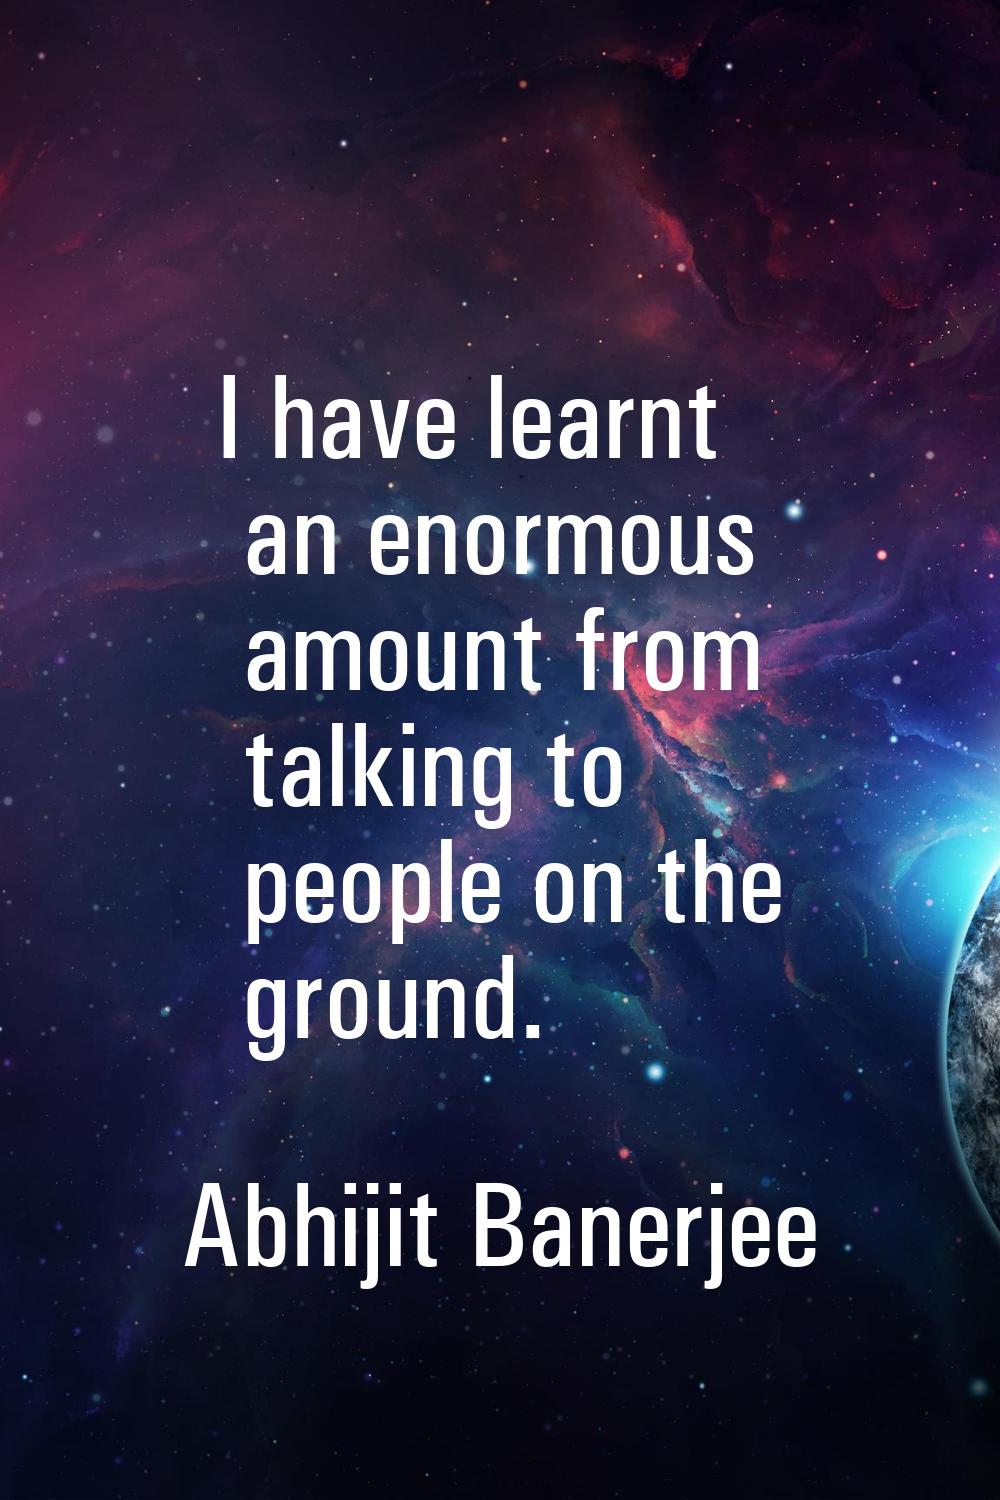 I have learnt an enormous amount from talking to people on the ground.